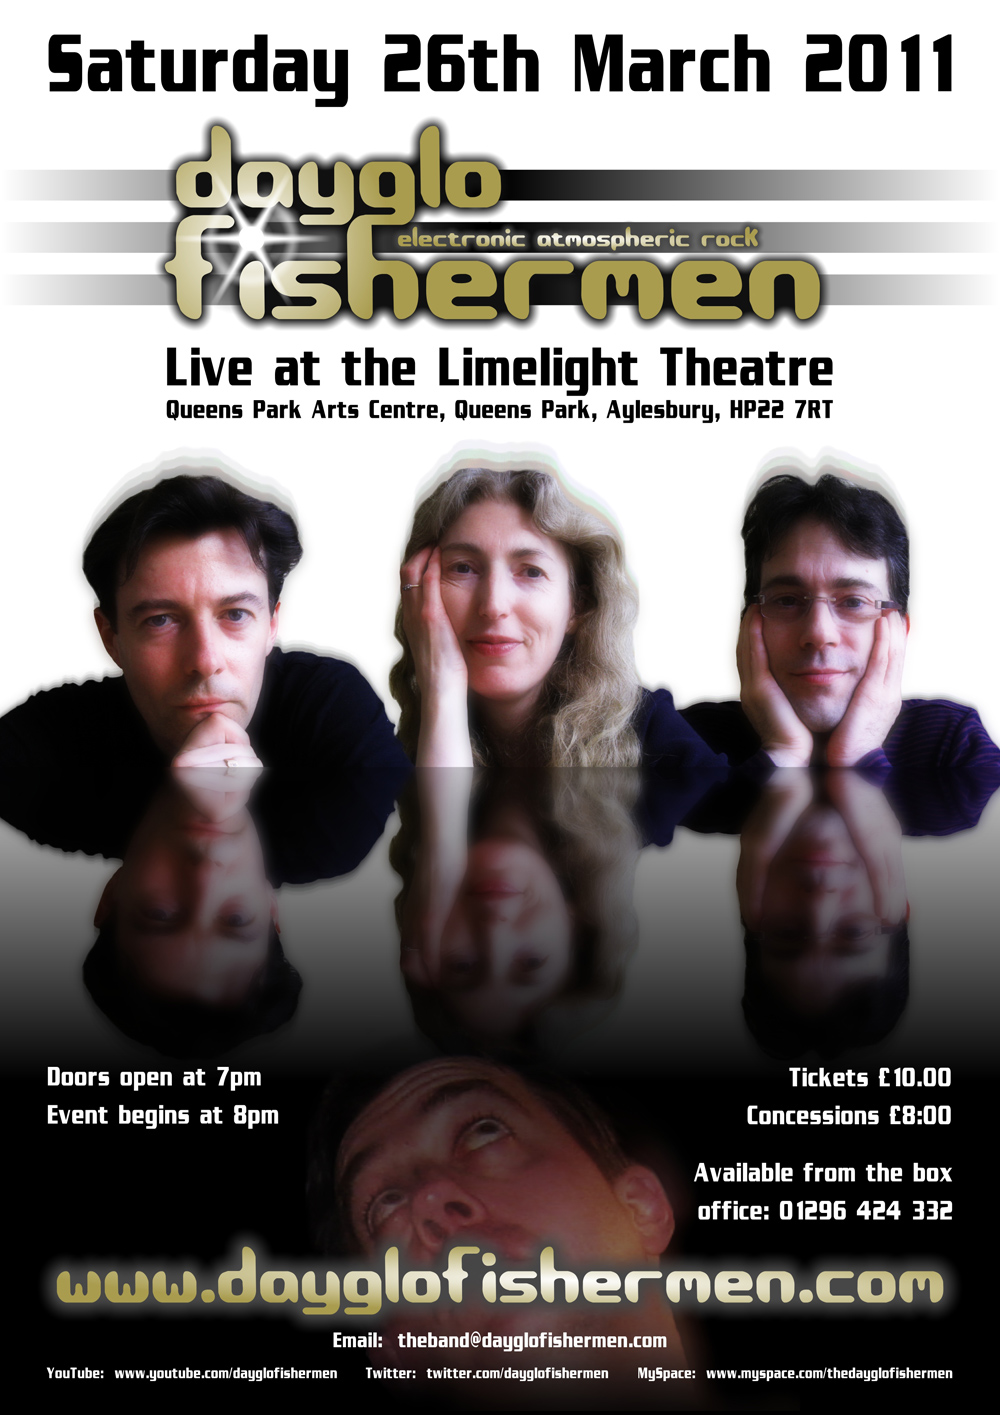 Limelight Theatre concert poster 2011